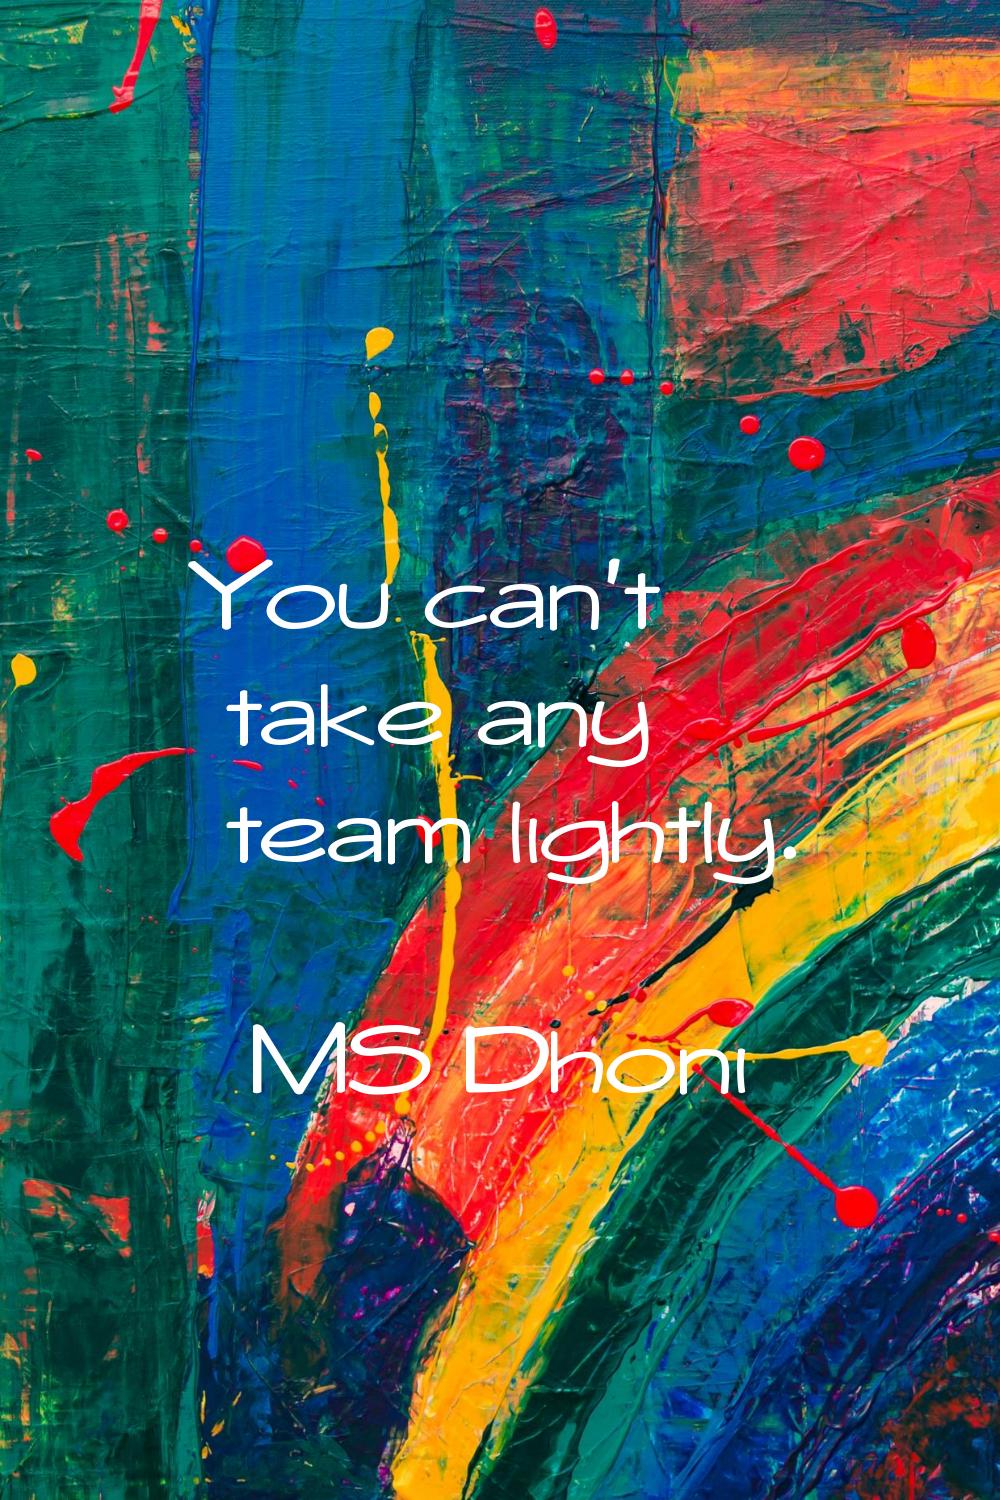 You can't take any team lightly.